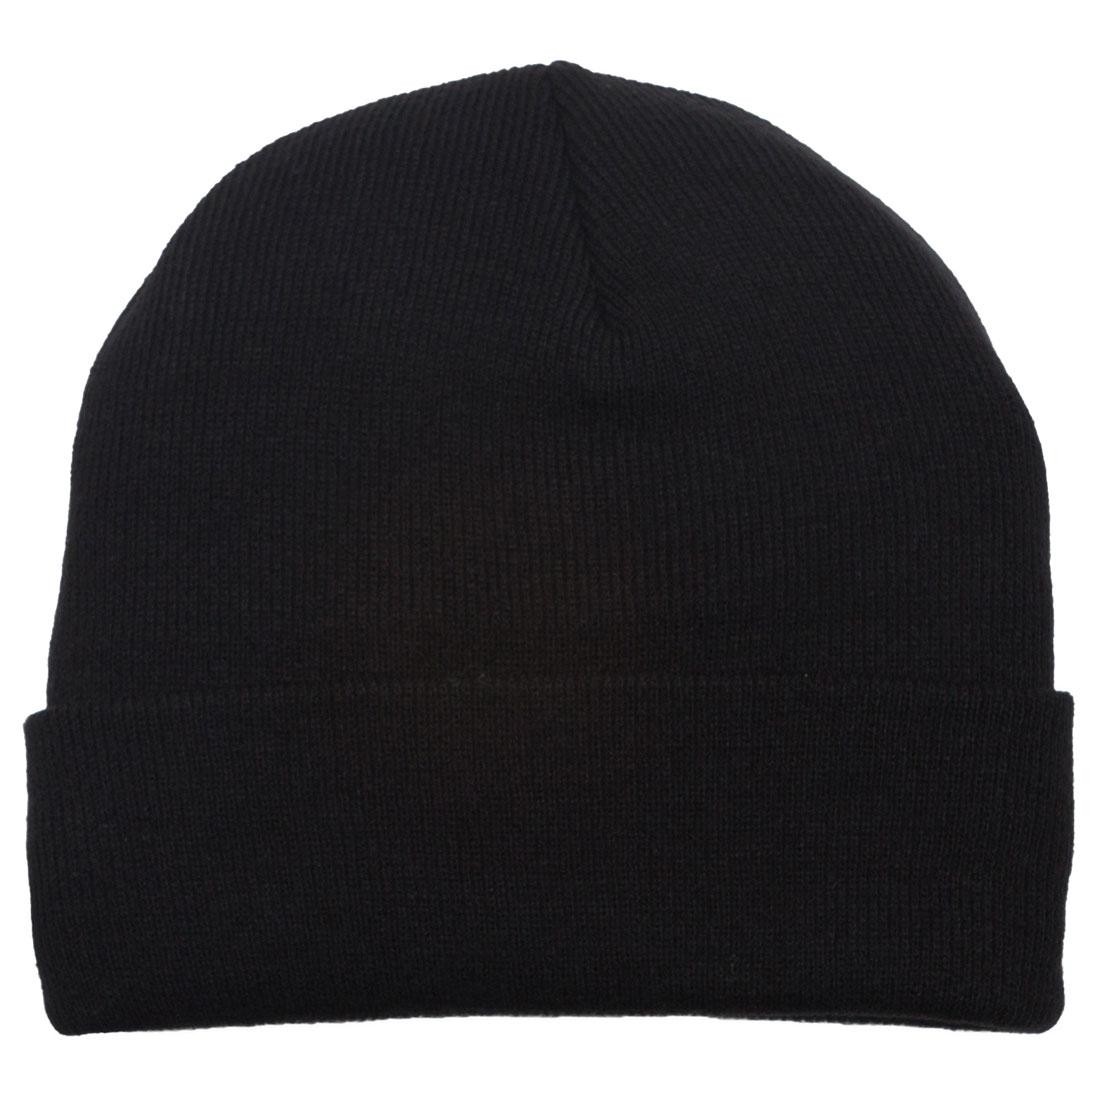 Paper Planes Patch Skully Beanie black